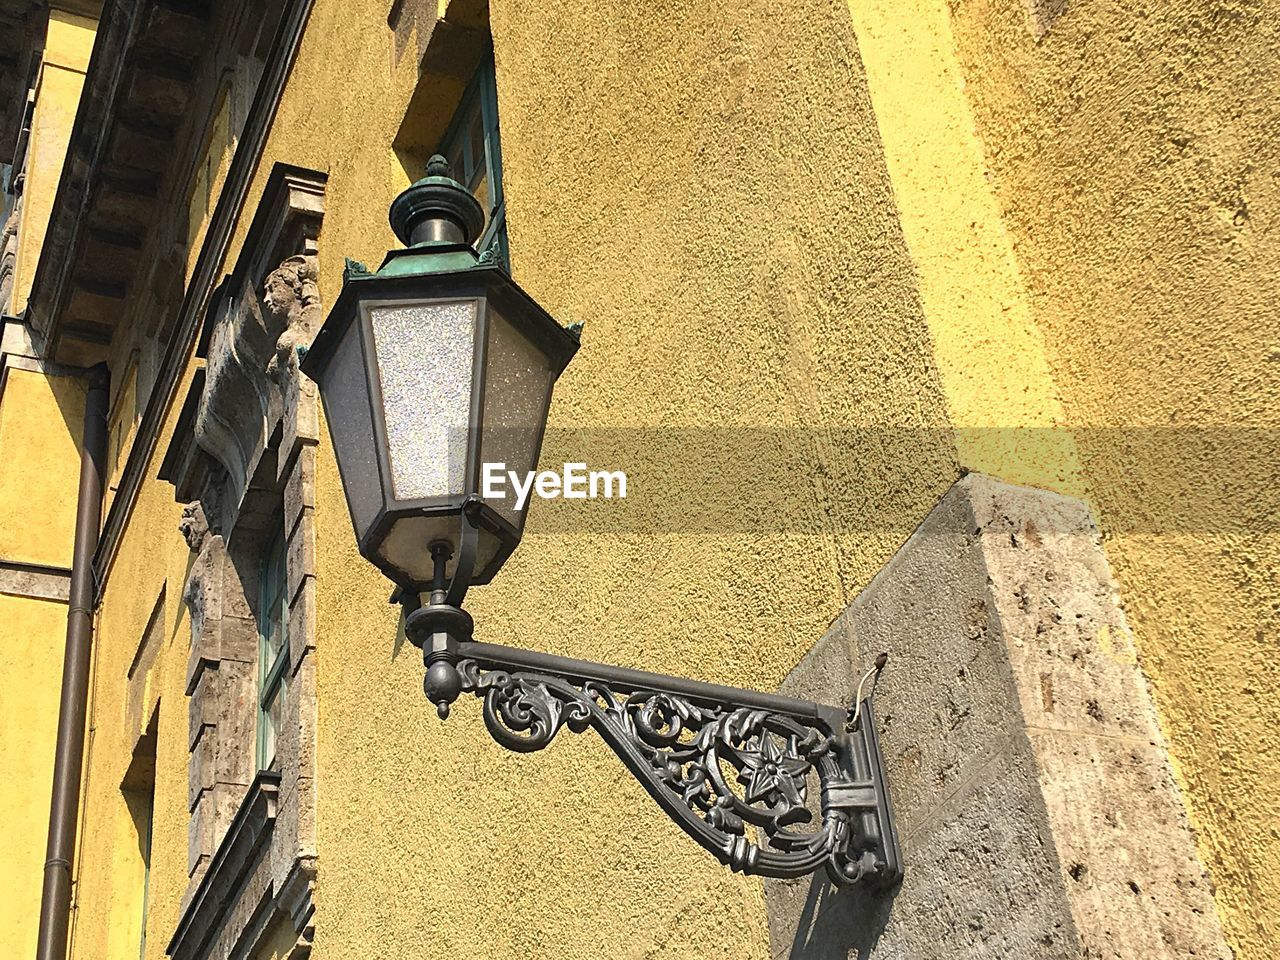 LOW ANGLE VIEW OF STREET LIGHT AGAINST BUILDING WALL